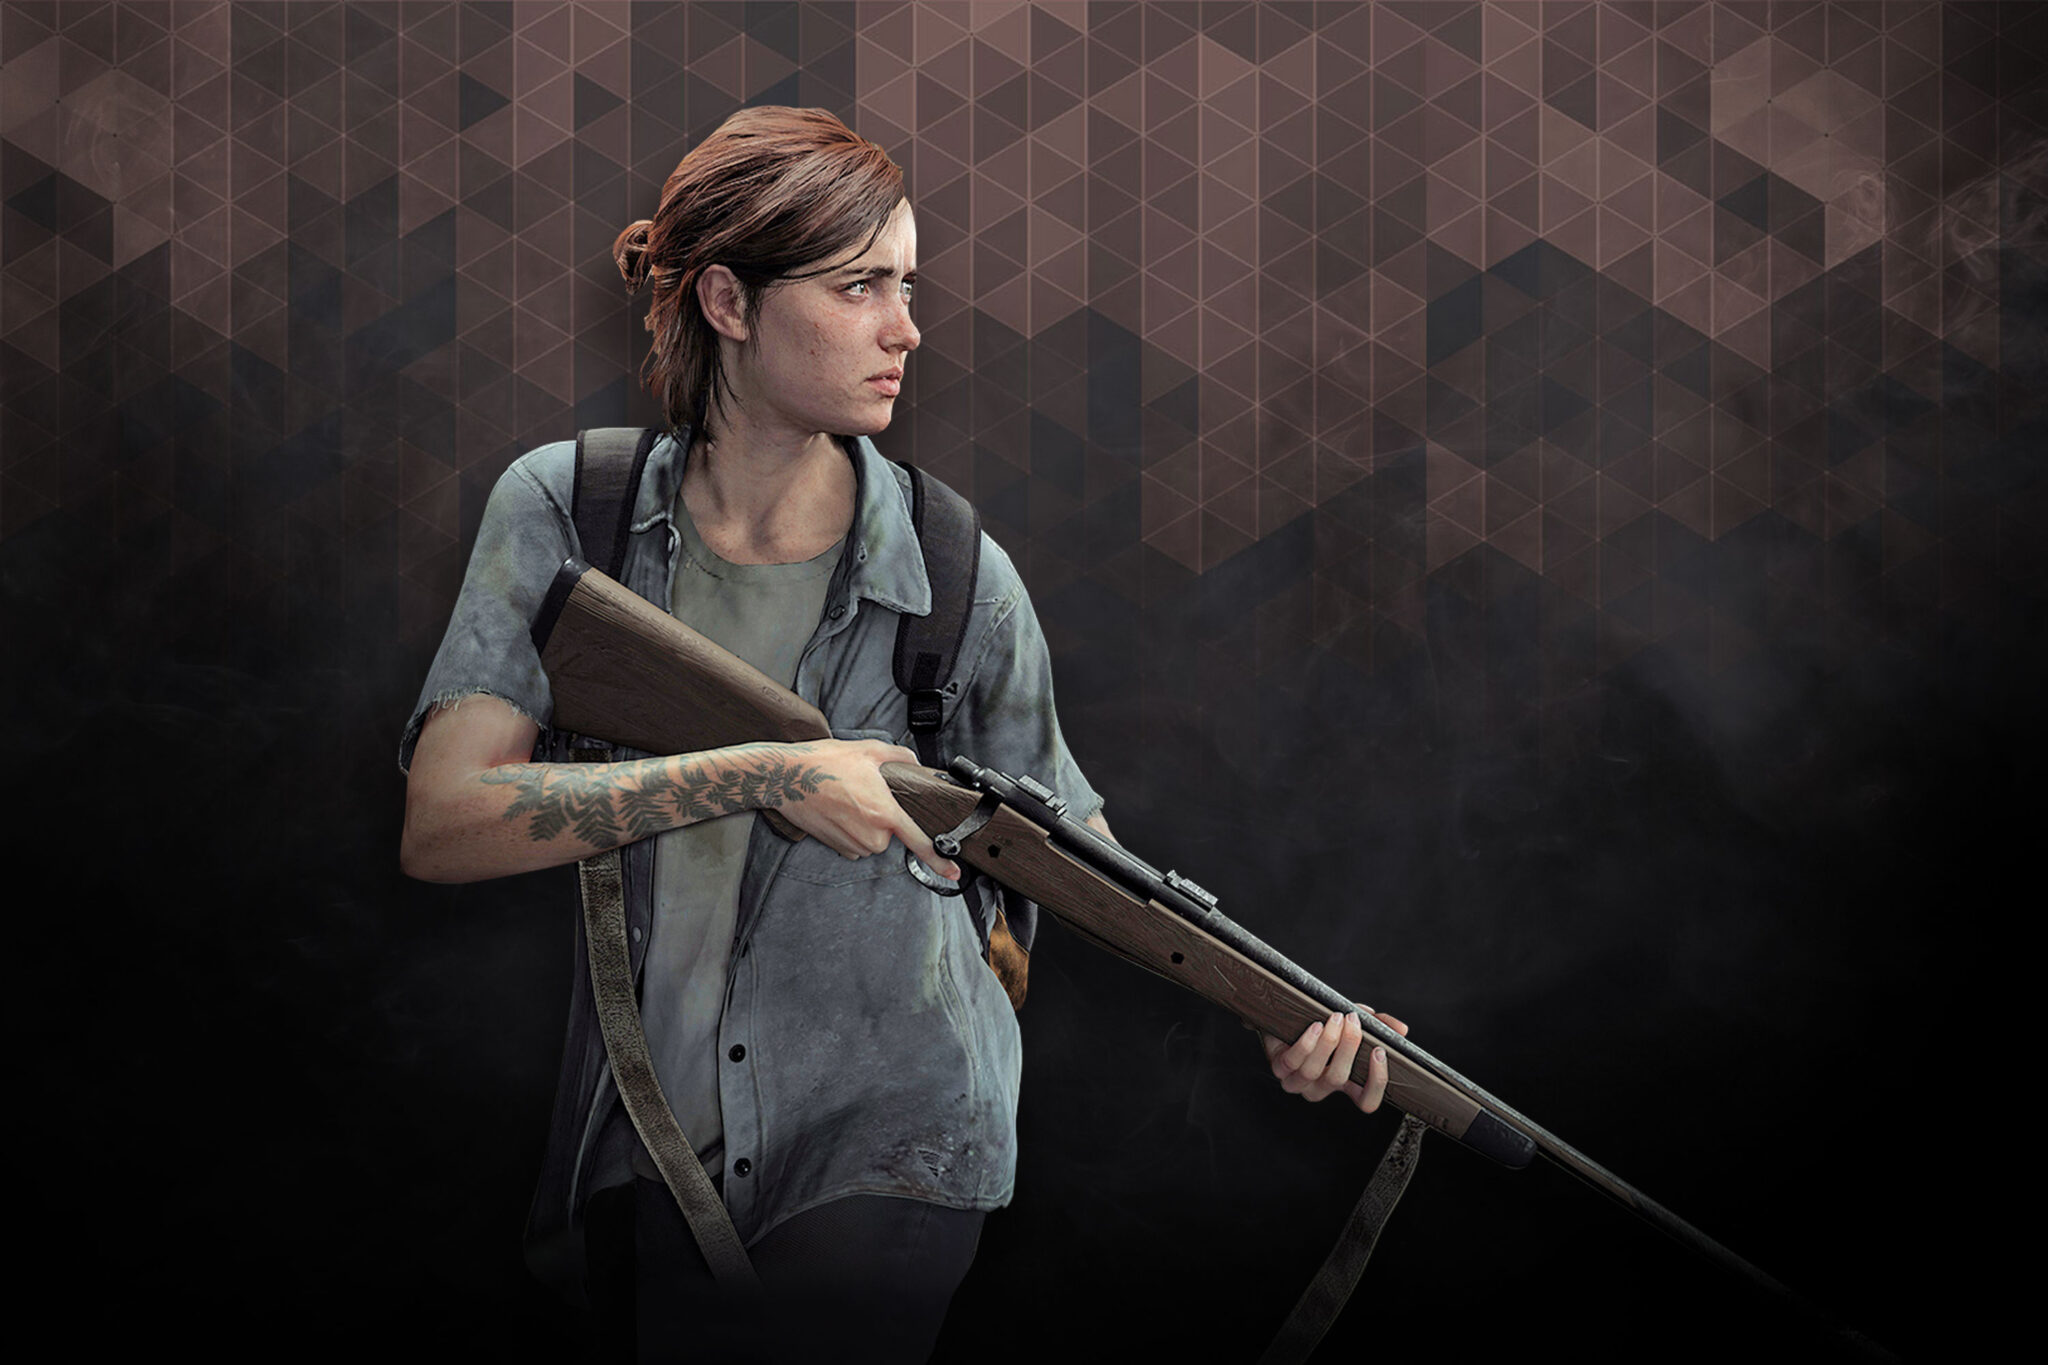 free download the last of us remake